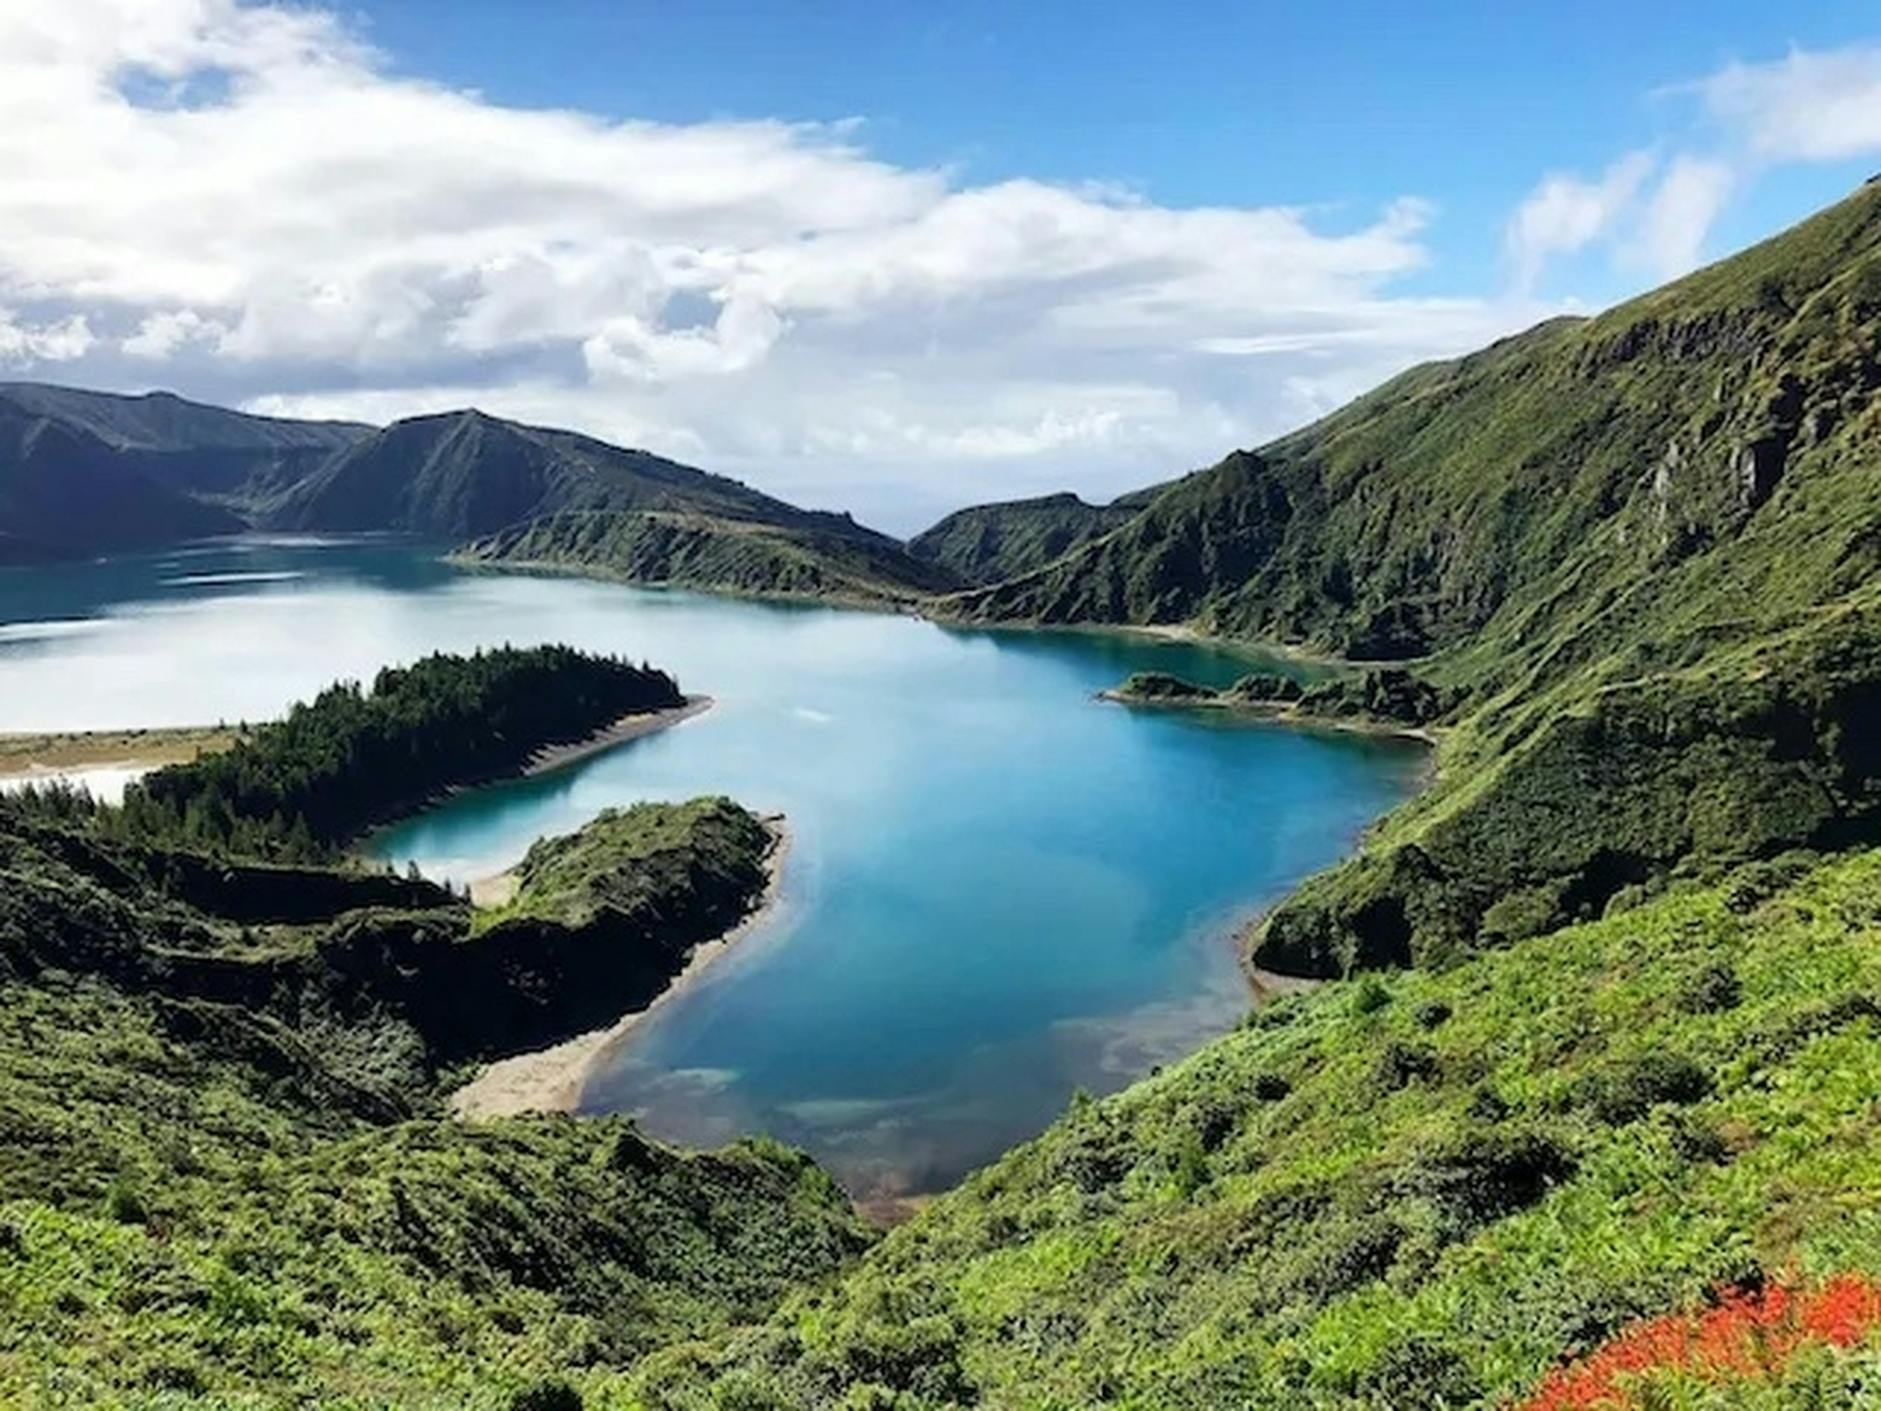 Azores, Portugal. Image by Martin Munk on Unsplash.